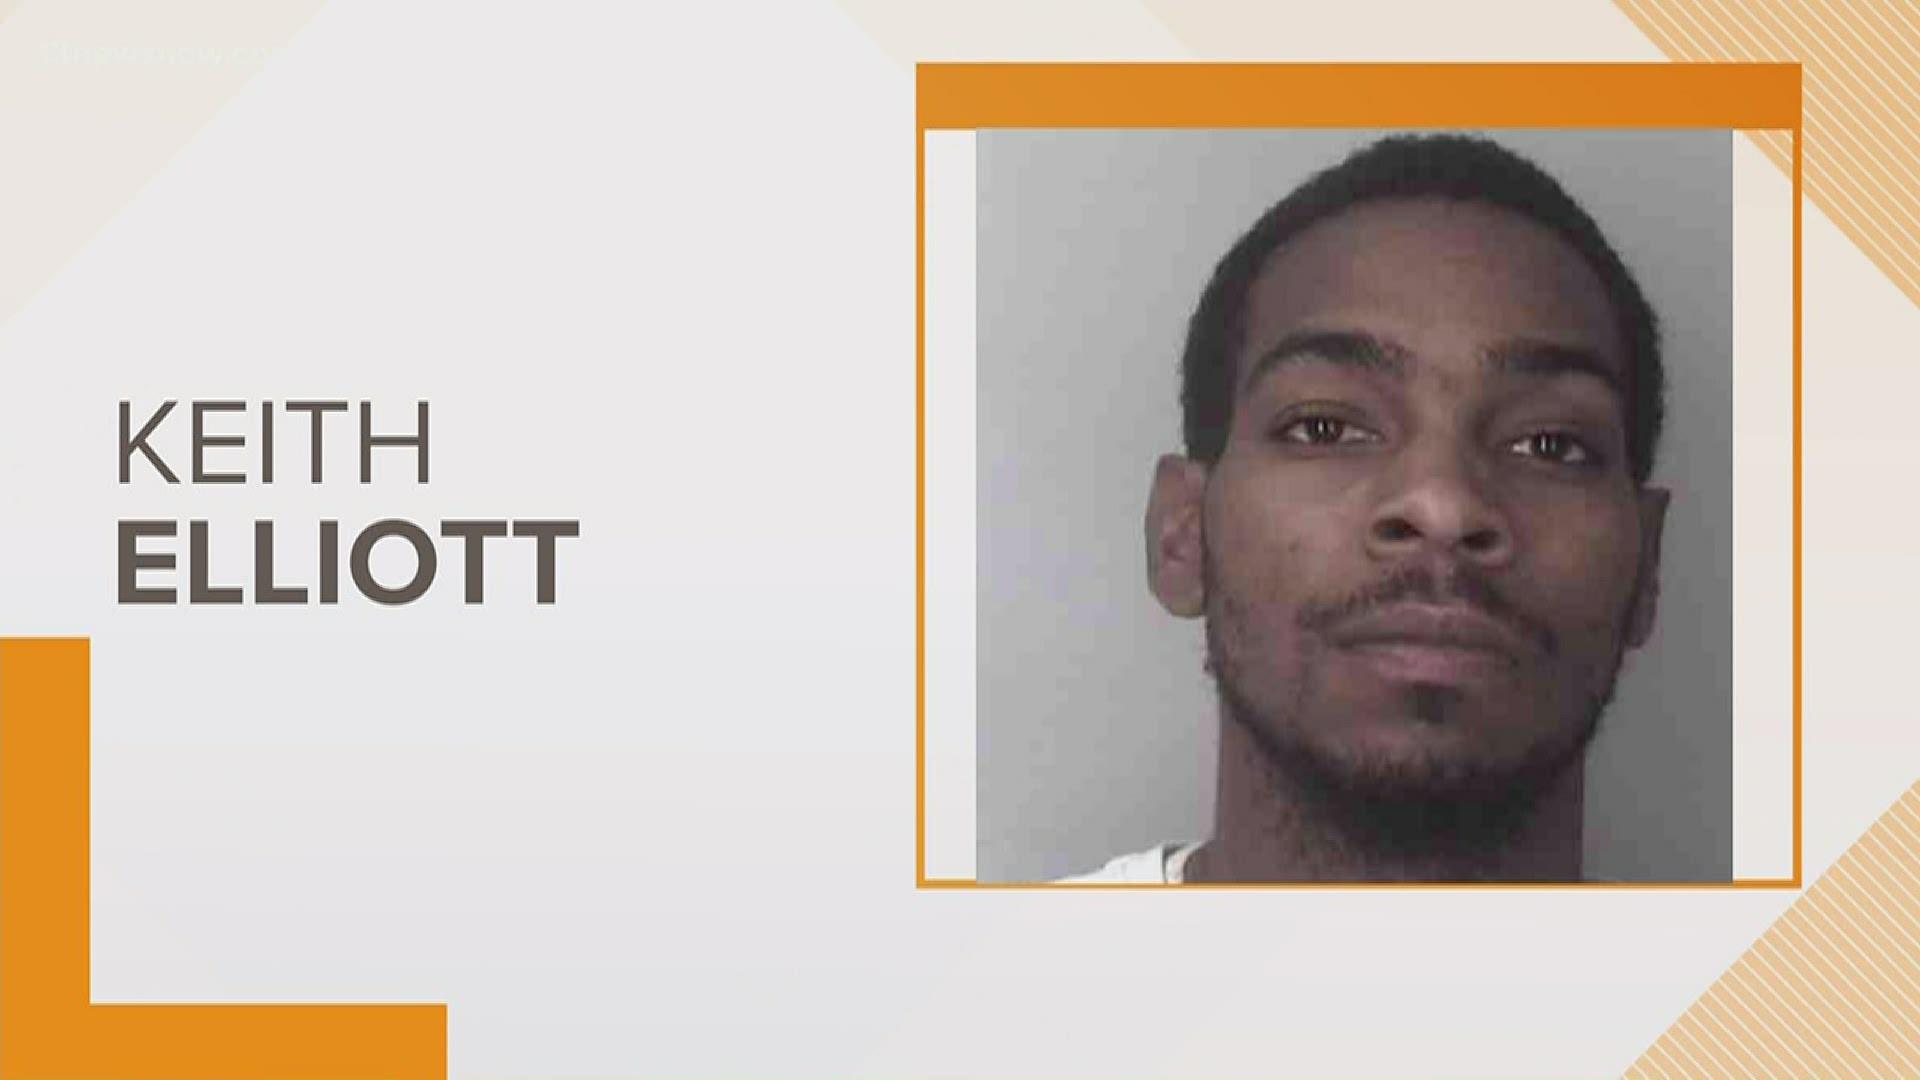 Police are looking for Keith Elliot, 25. He's considered armed and dangerous.